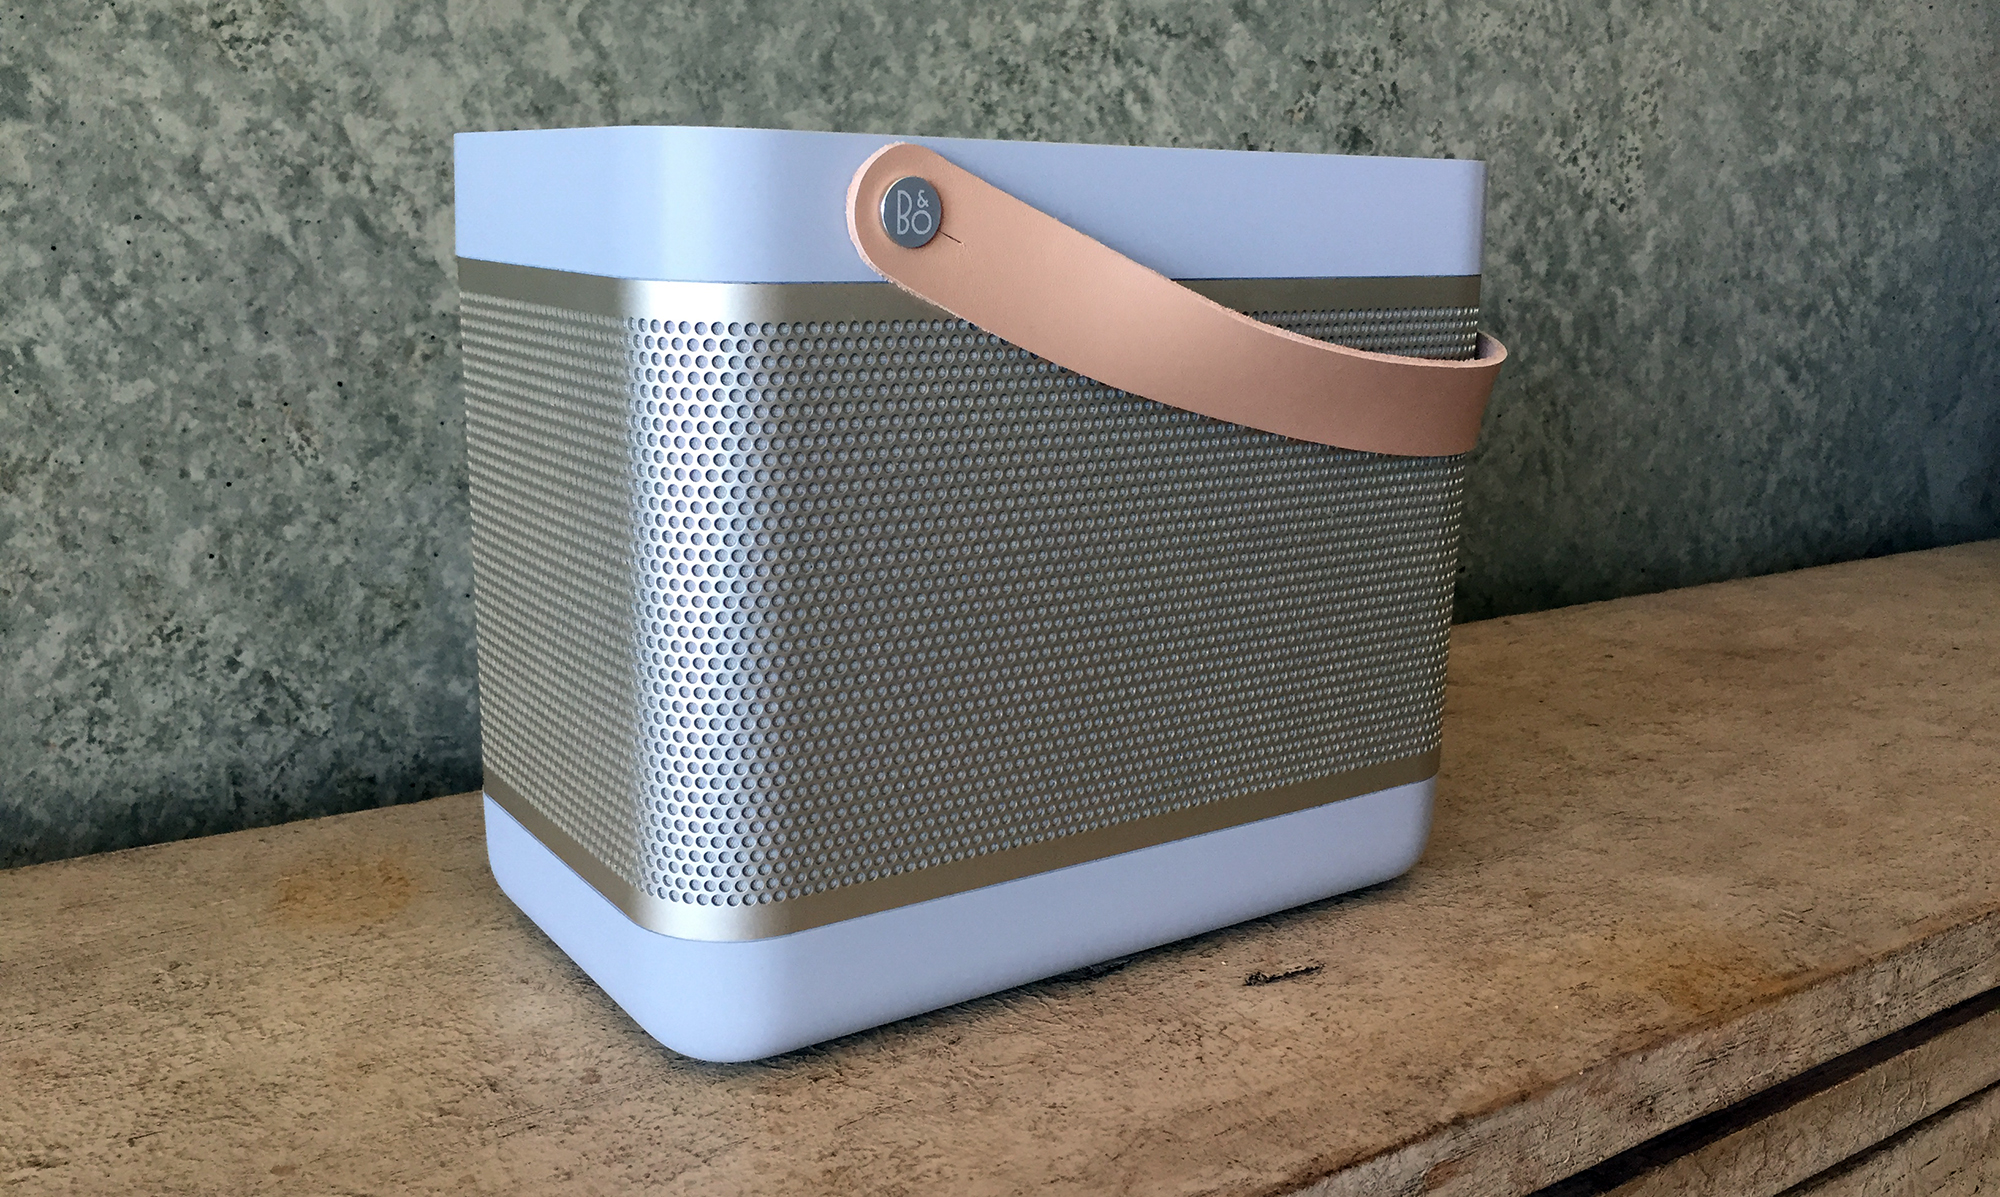 gouden snijder Missie Review: The Bang & Olufsen Beolit 15 is a big-ticket Bluetooth speaker with  a lavish design